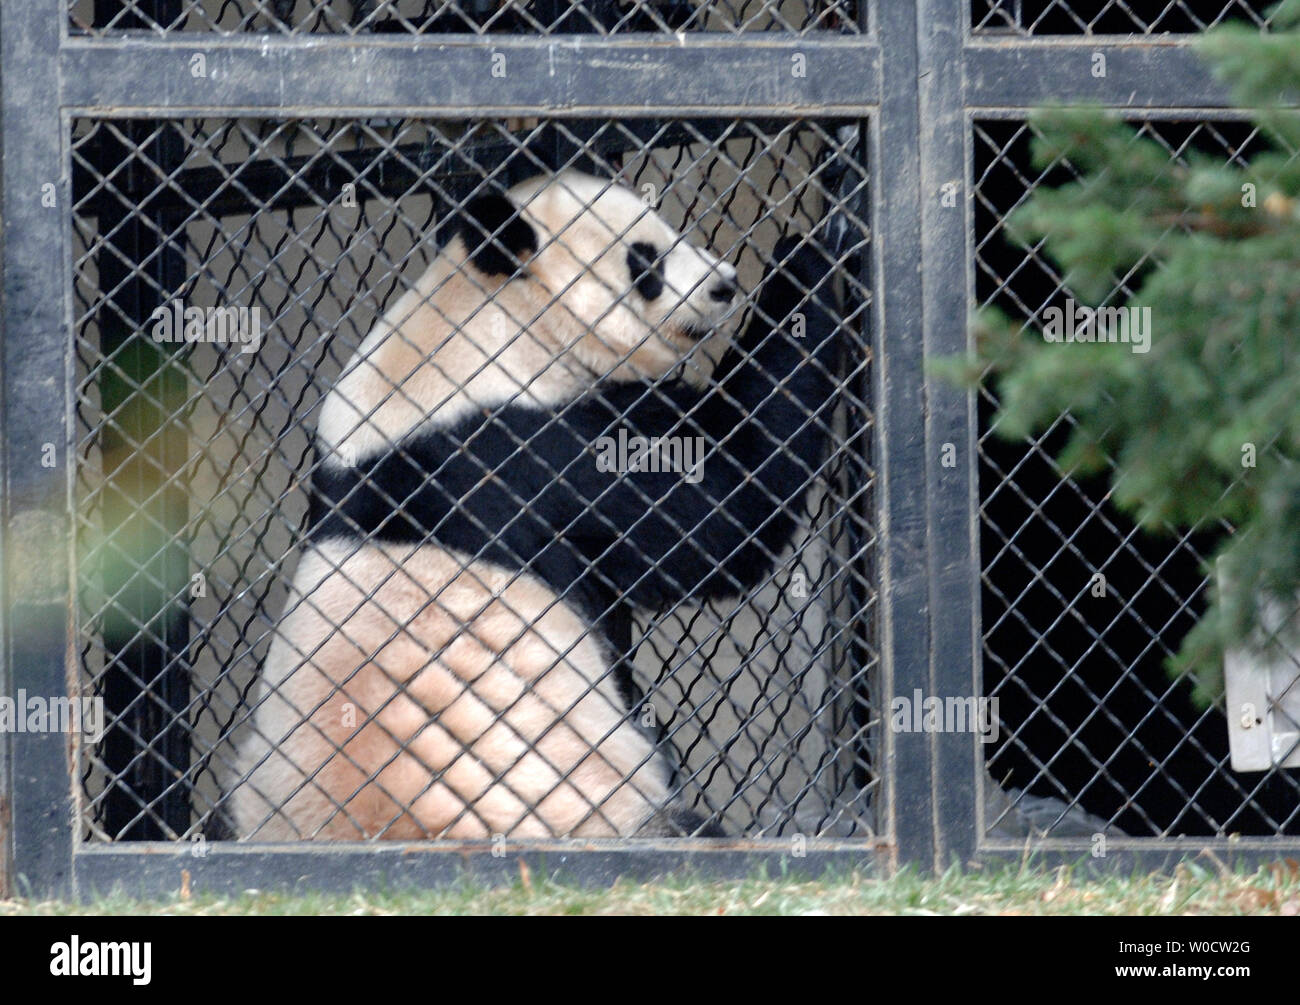 The National Zoo's female panda Mei Xiang waits in its cage while her four and a half month old son Tai Shan participates in a photo-op, in Washington on November 29, 2005. The panda cub made its media day view today to over 100 members of the press, he will meet a public of sold out ticket holders on December 9, 2005. (UPI Photo/Kevin Dietsch) Stock Photo